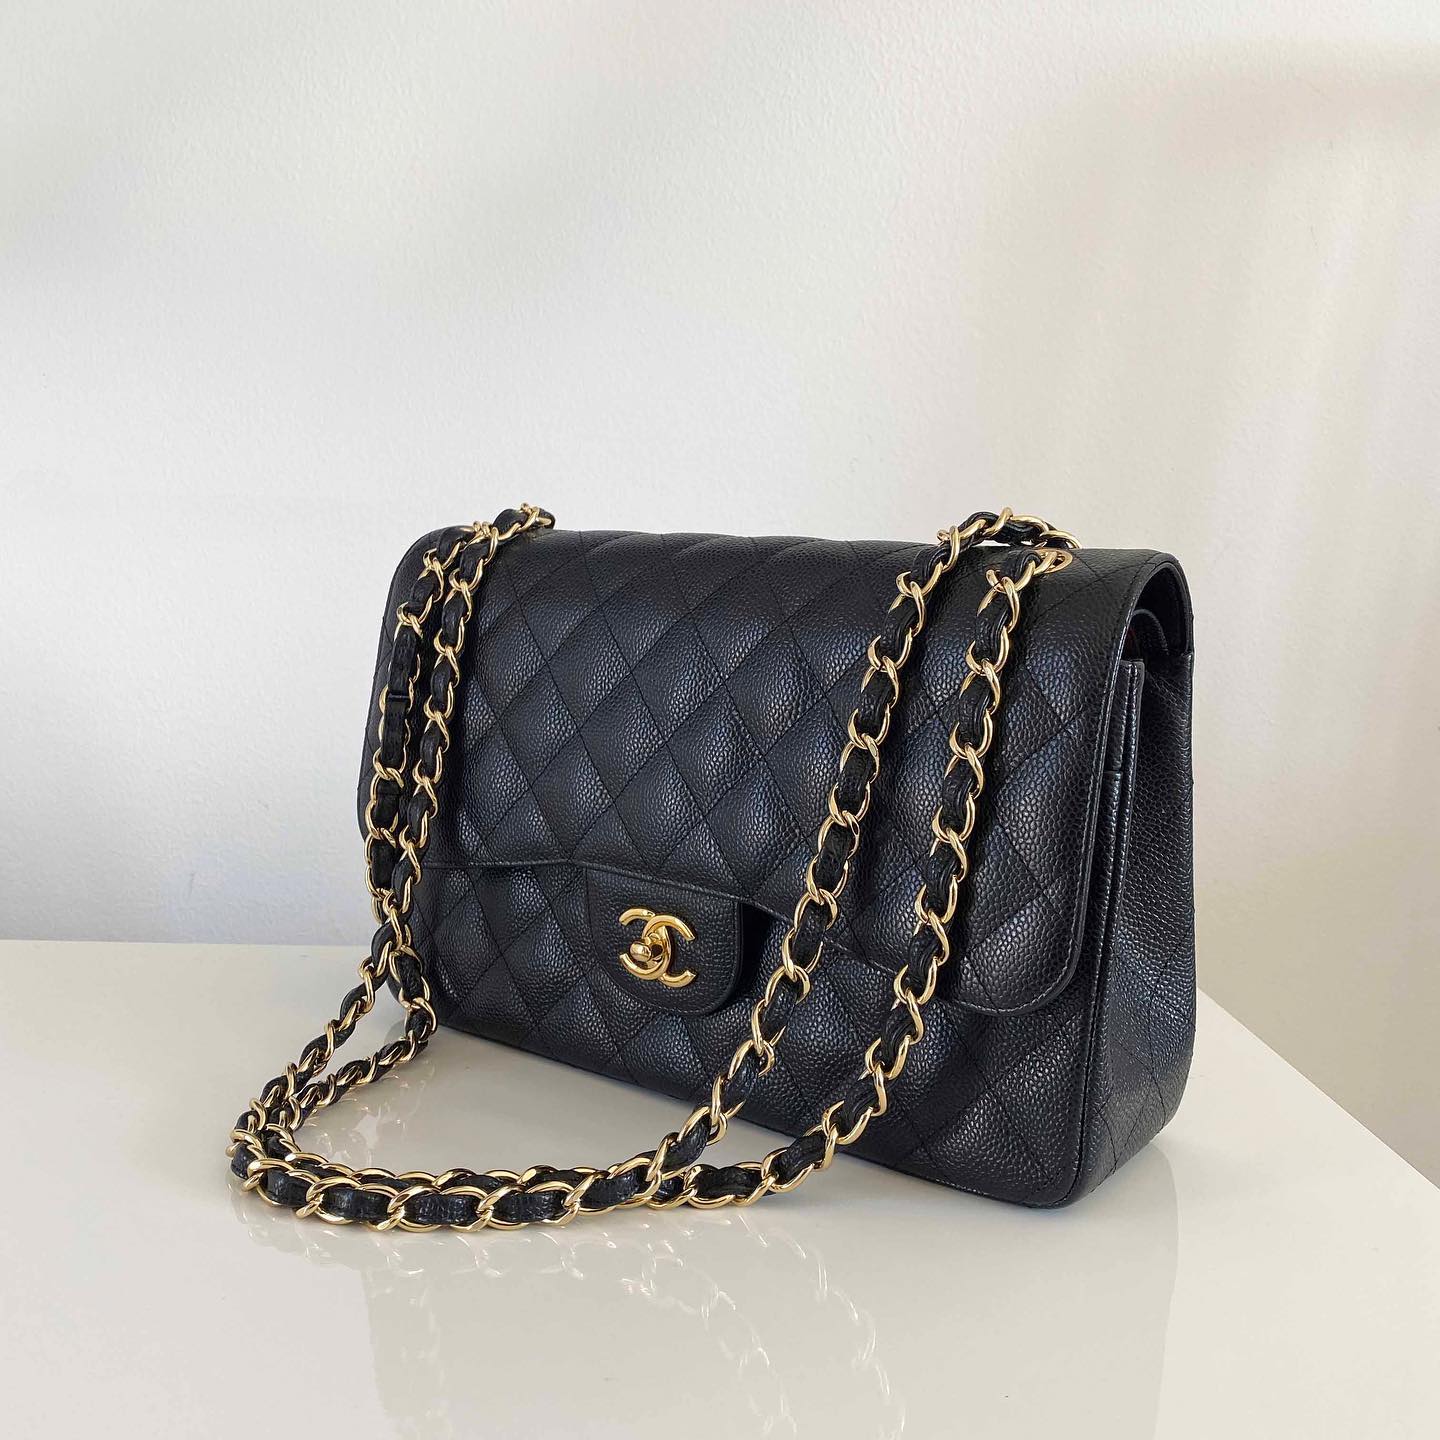 shop for chanel bags online